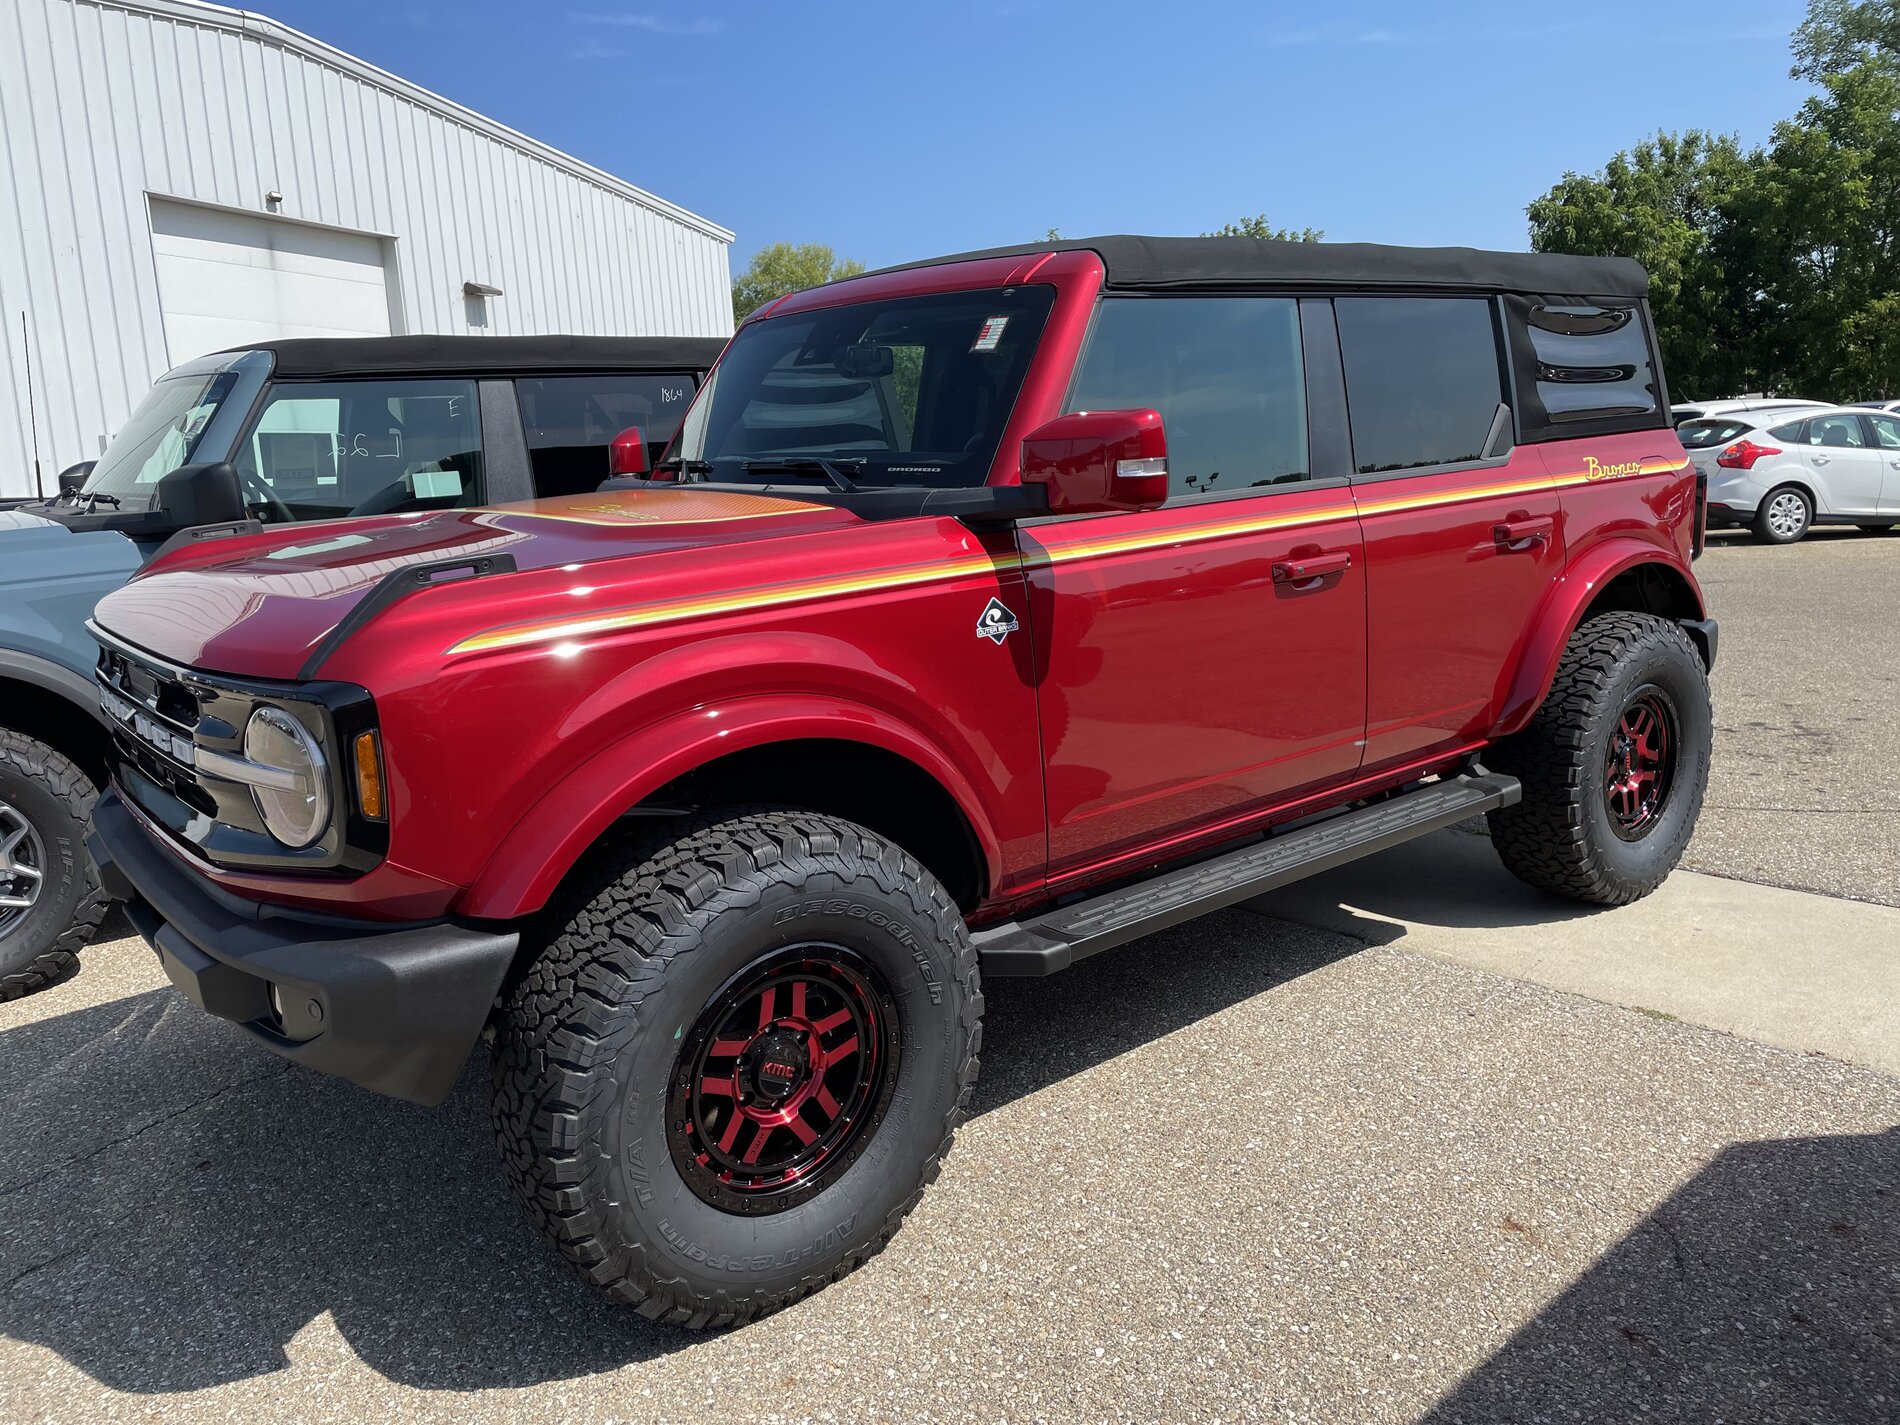 Ford Bronco Our Rapid Red Outer Banks w/ KMC Recons 17x 8.5, BFG 315/70/17, 4WP Level Kit, Ford Retro Graphics Kit 8F7615EF-ECAA-4F46-AFC6-F5327CE7FF42